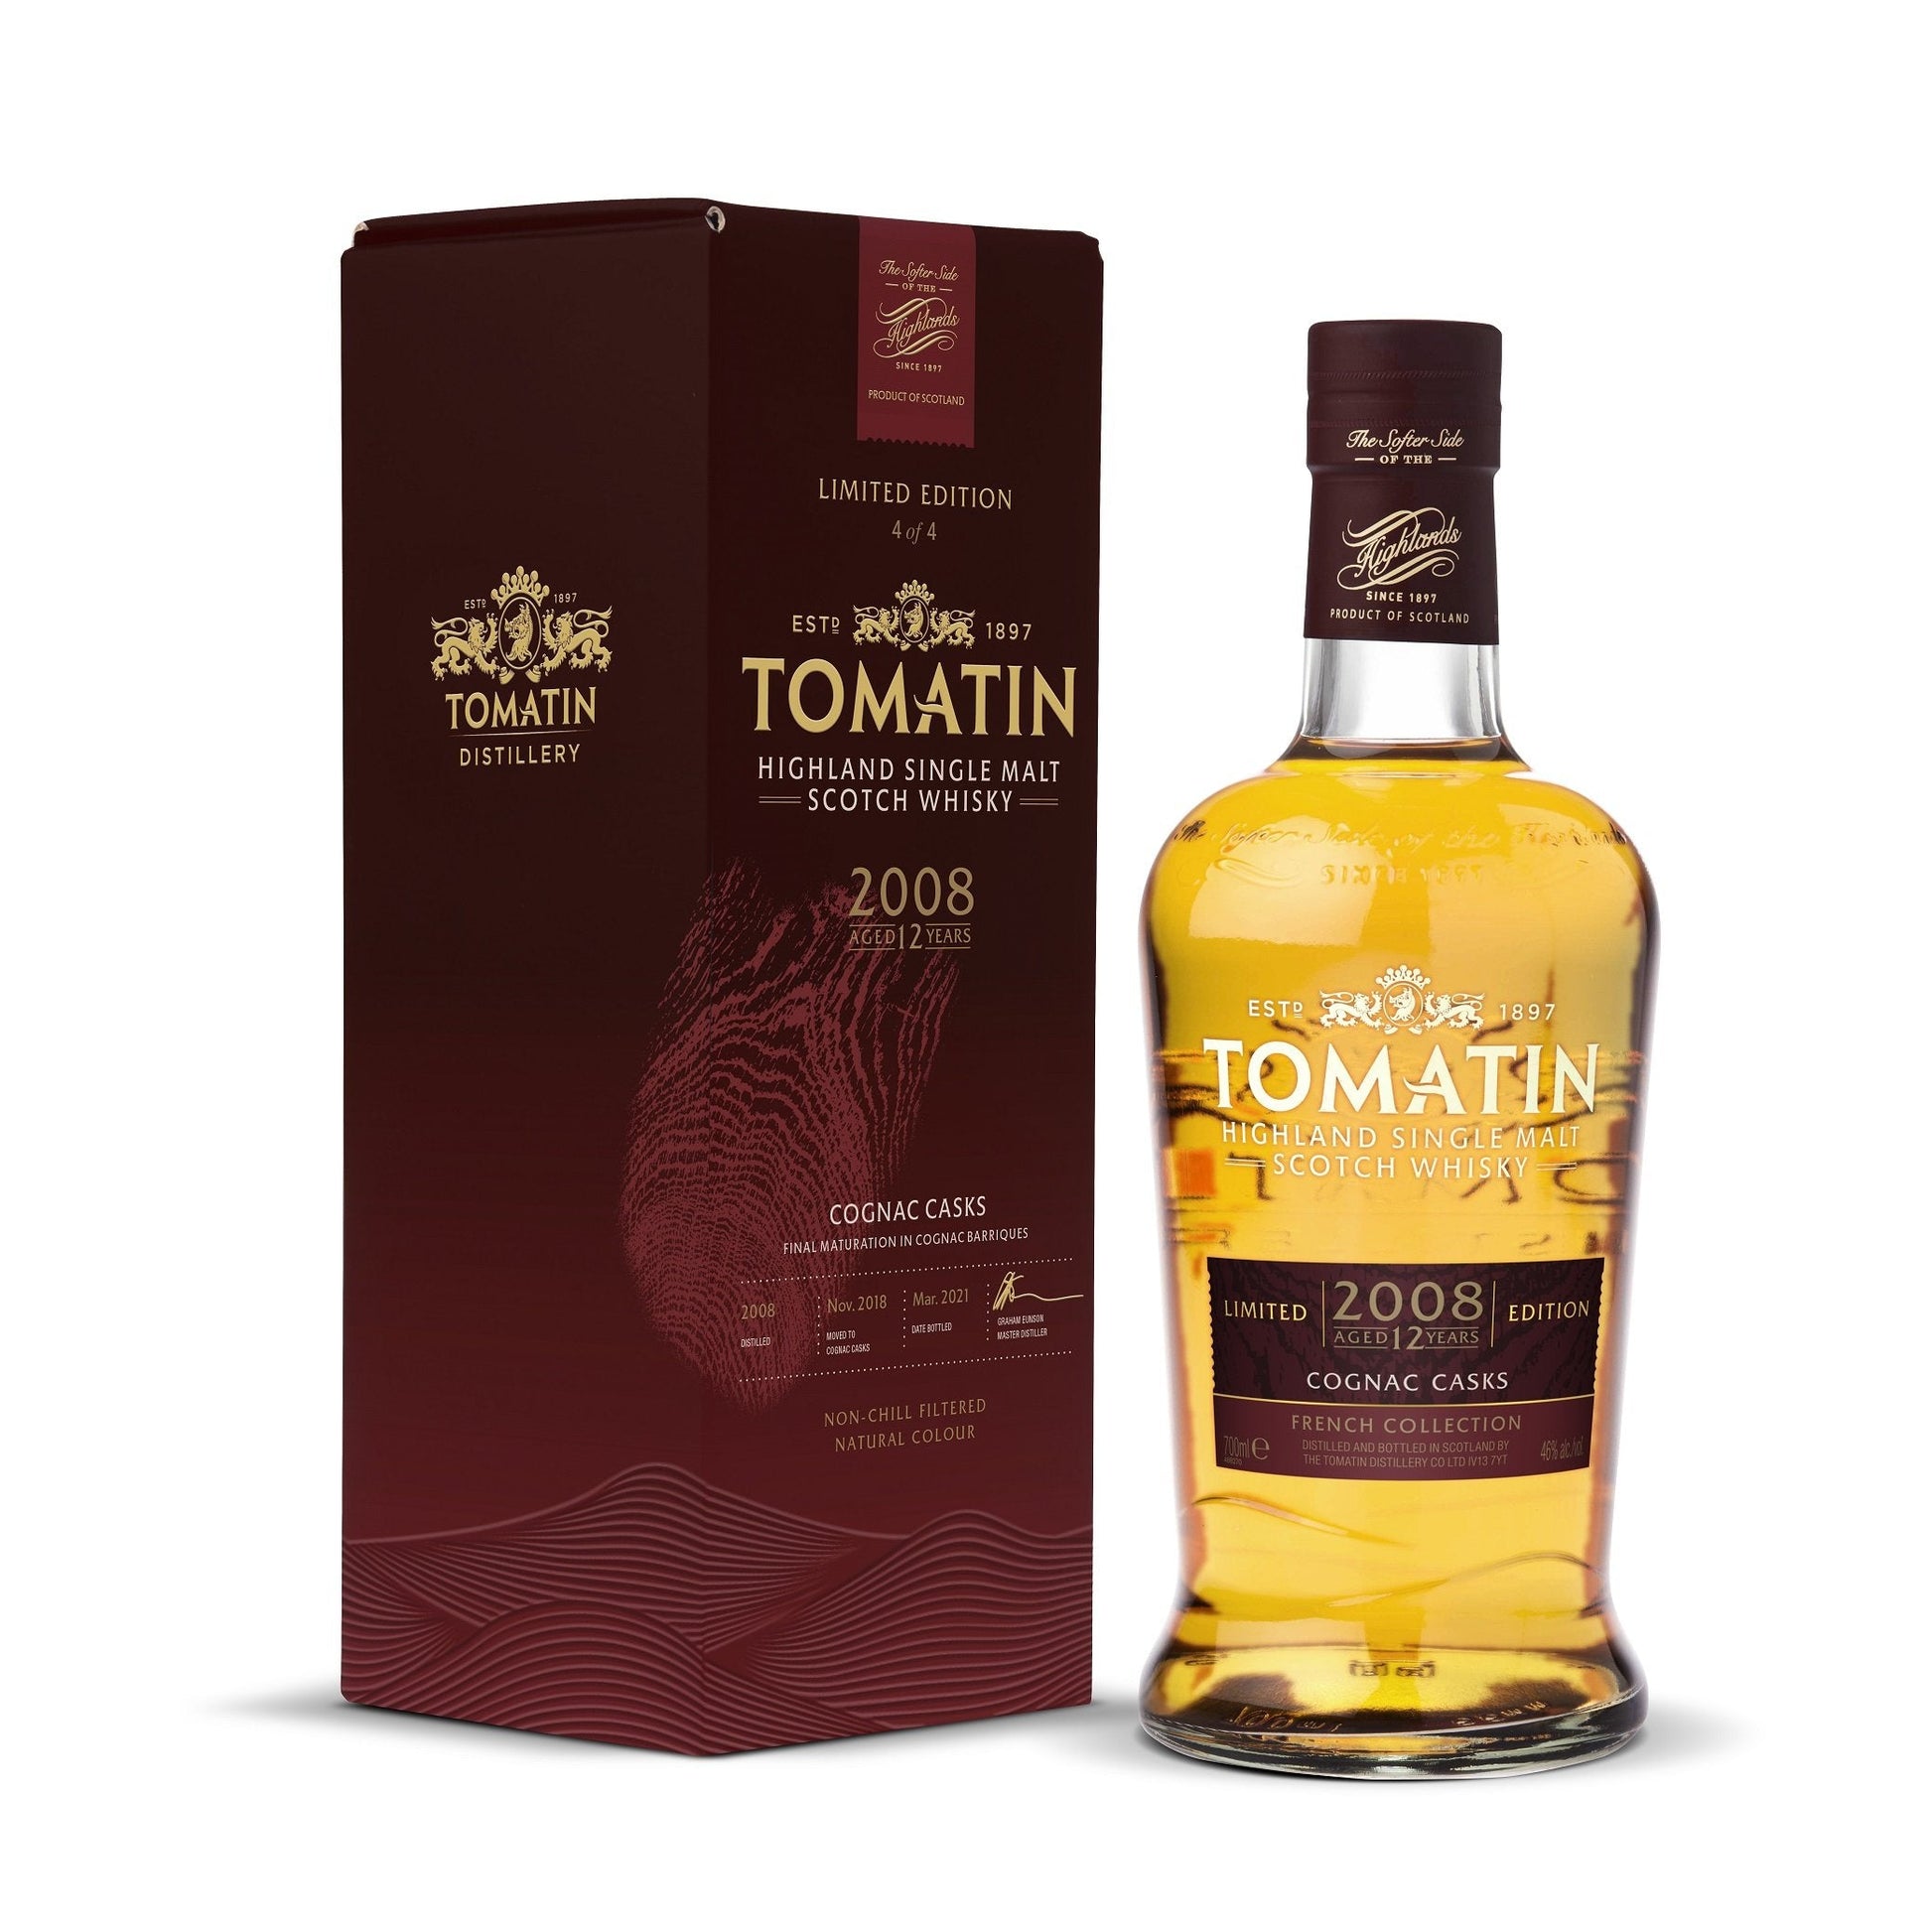 Tomatin French Collection - Cognac Casks 12 Year Old 2008 Limited Edition 4 of 4 - Single Malt Scotch Whisky-Single Malt Scotch Whisky-Fountainhall Wines